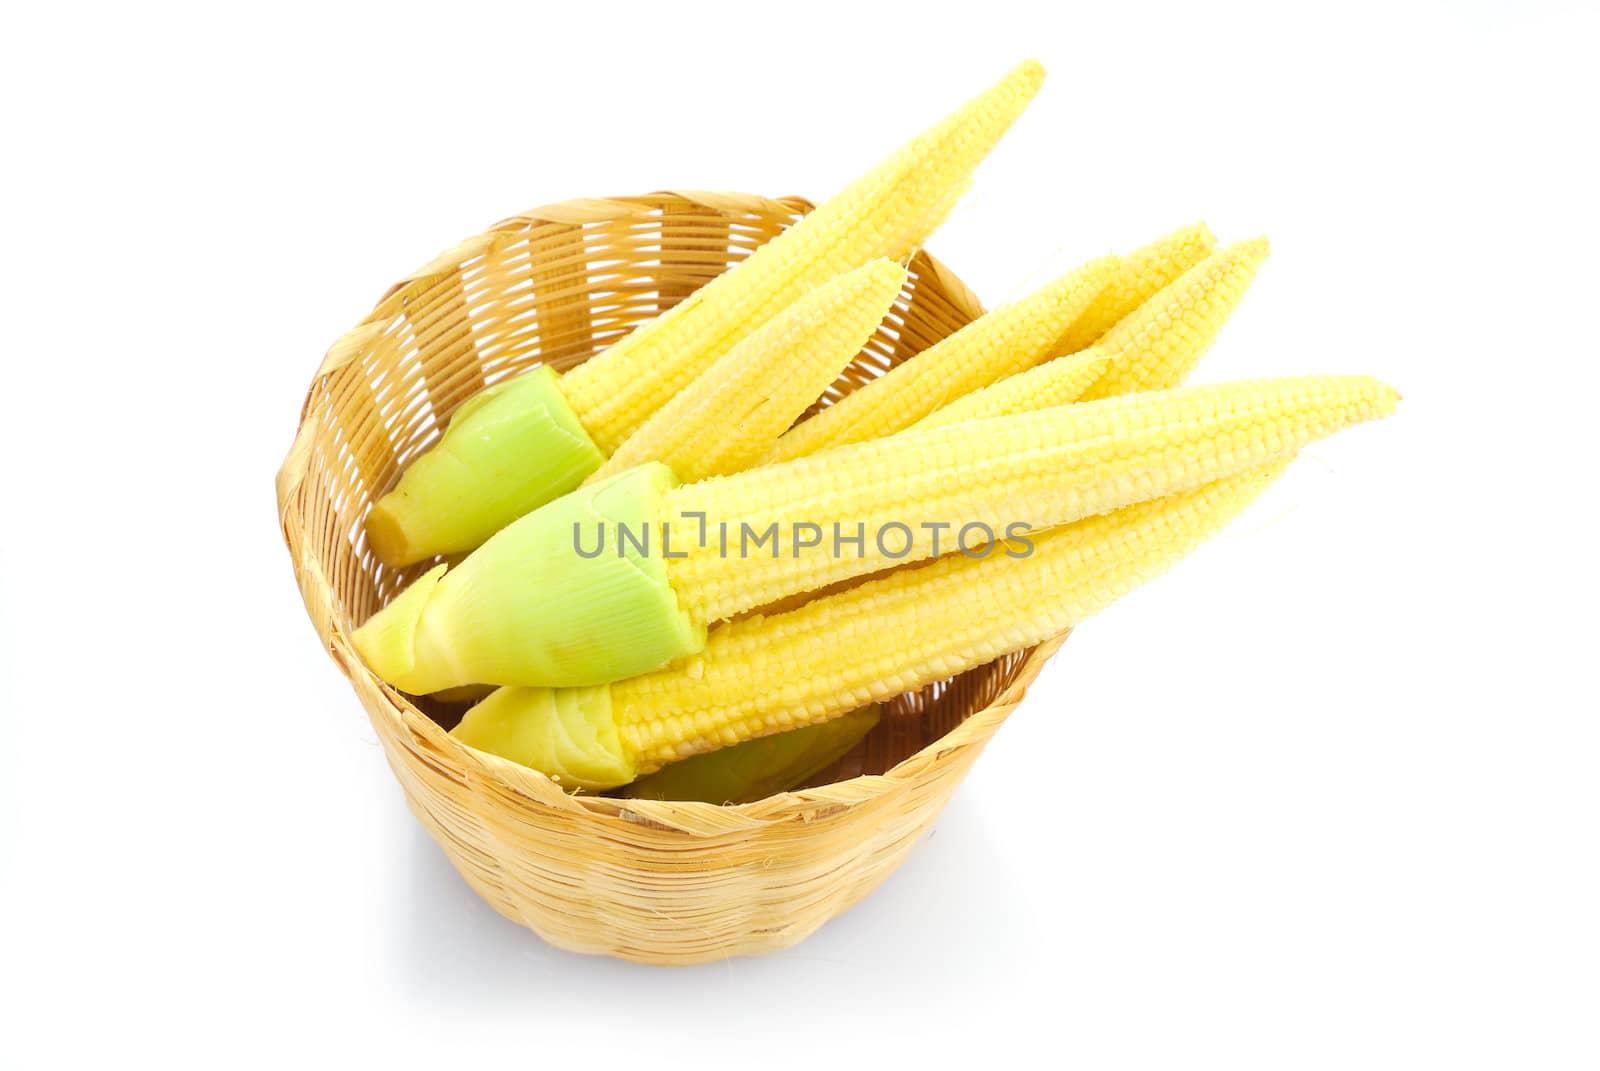 Baby corn or young corn by teen00000